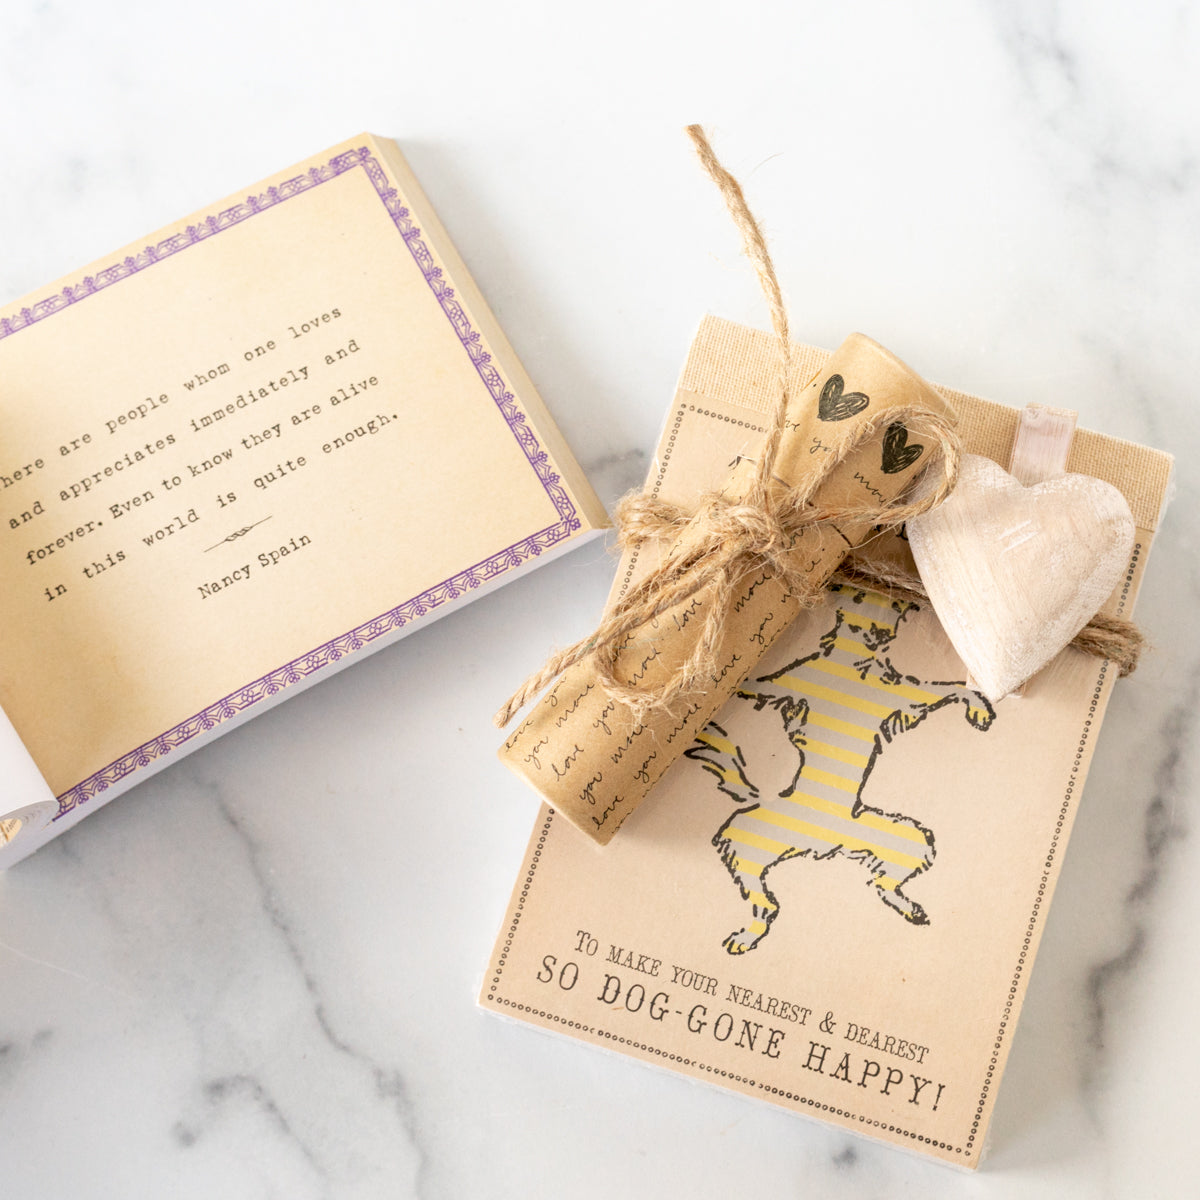 150 Love Letters Gift Set